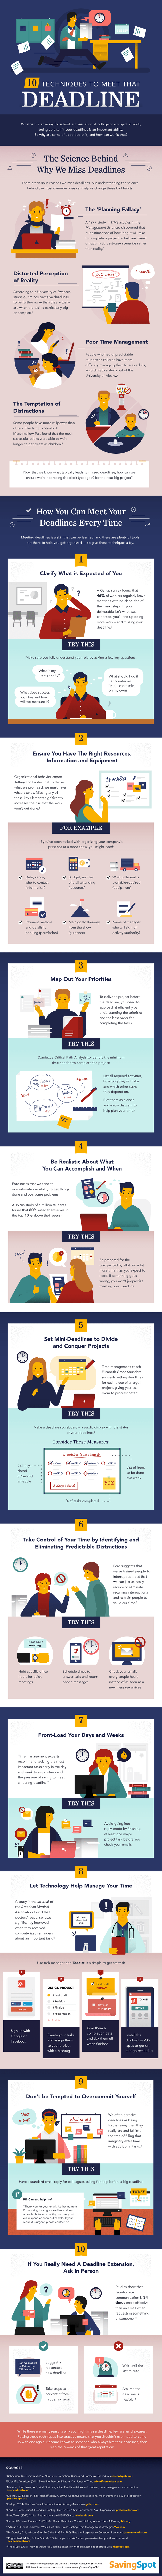 [Infographic] 10 Tips To Stop You From Missing That Deadline